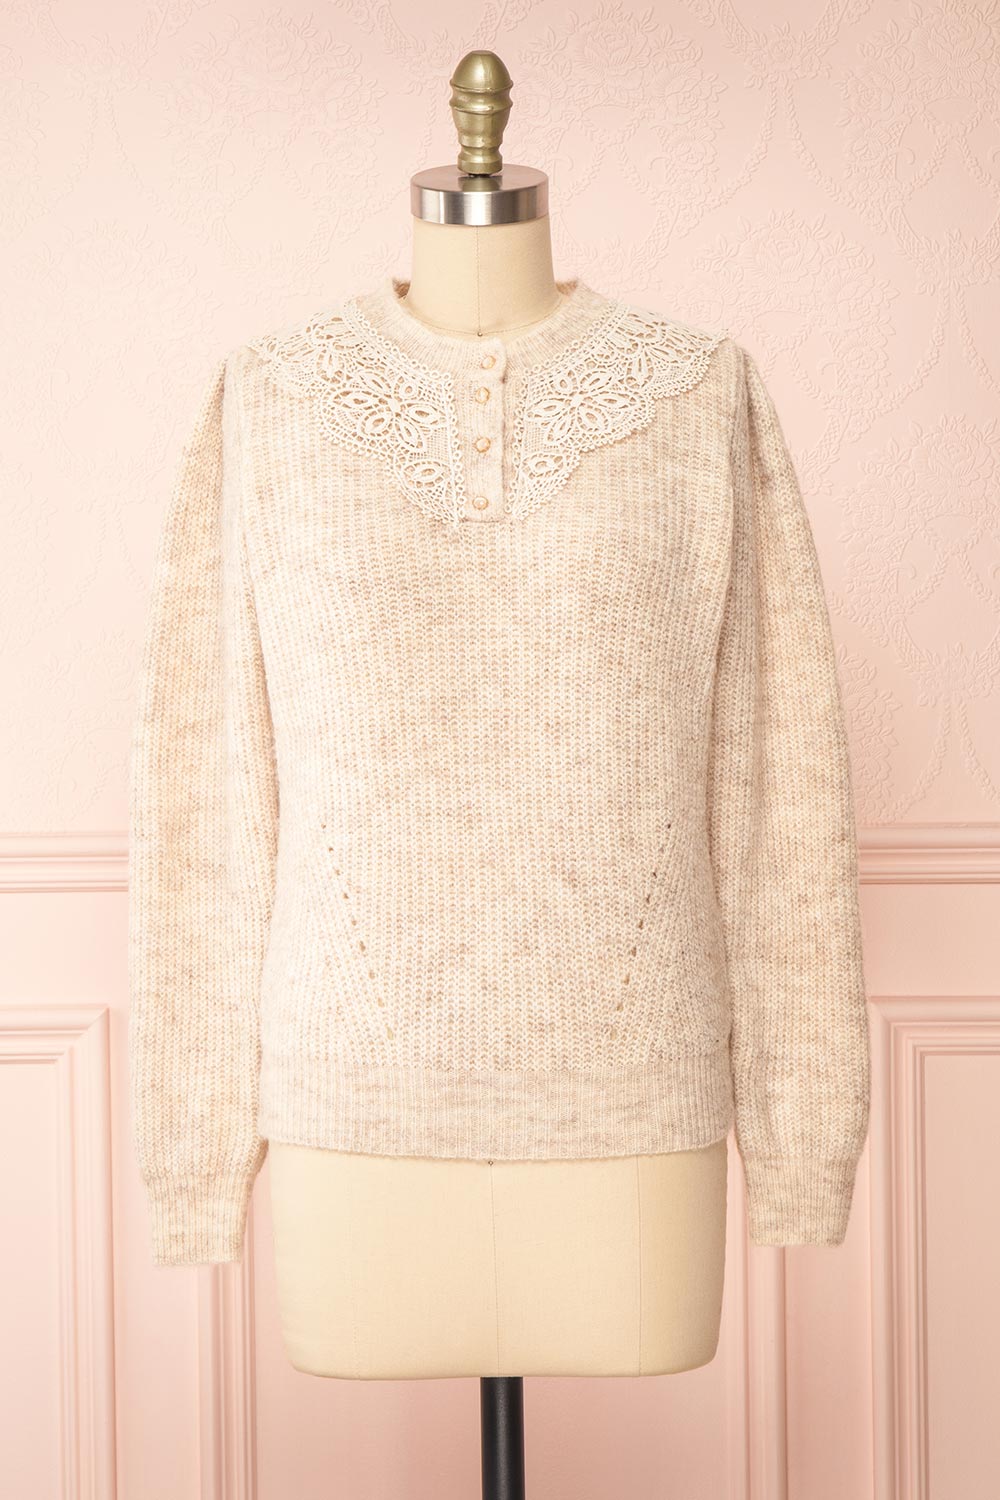 Reagan Beige Buttoned Collar Sweater w/ Lace